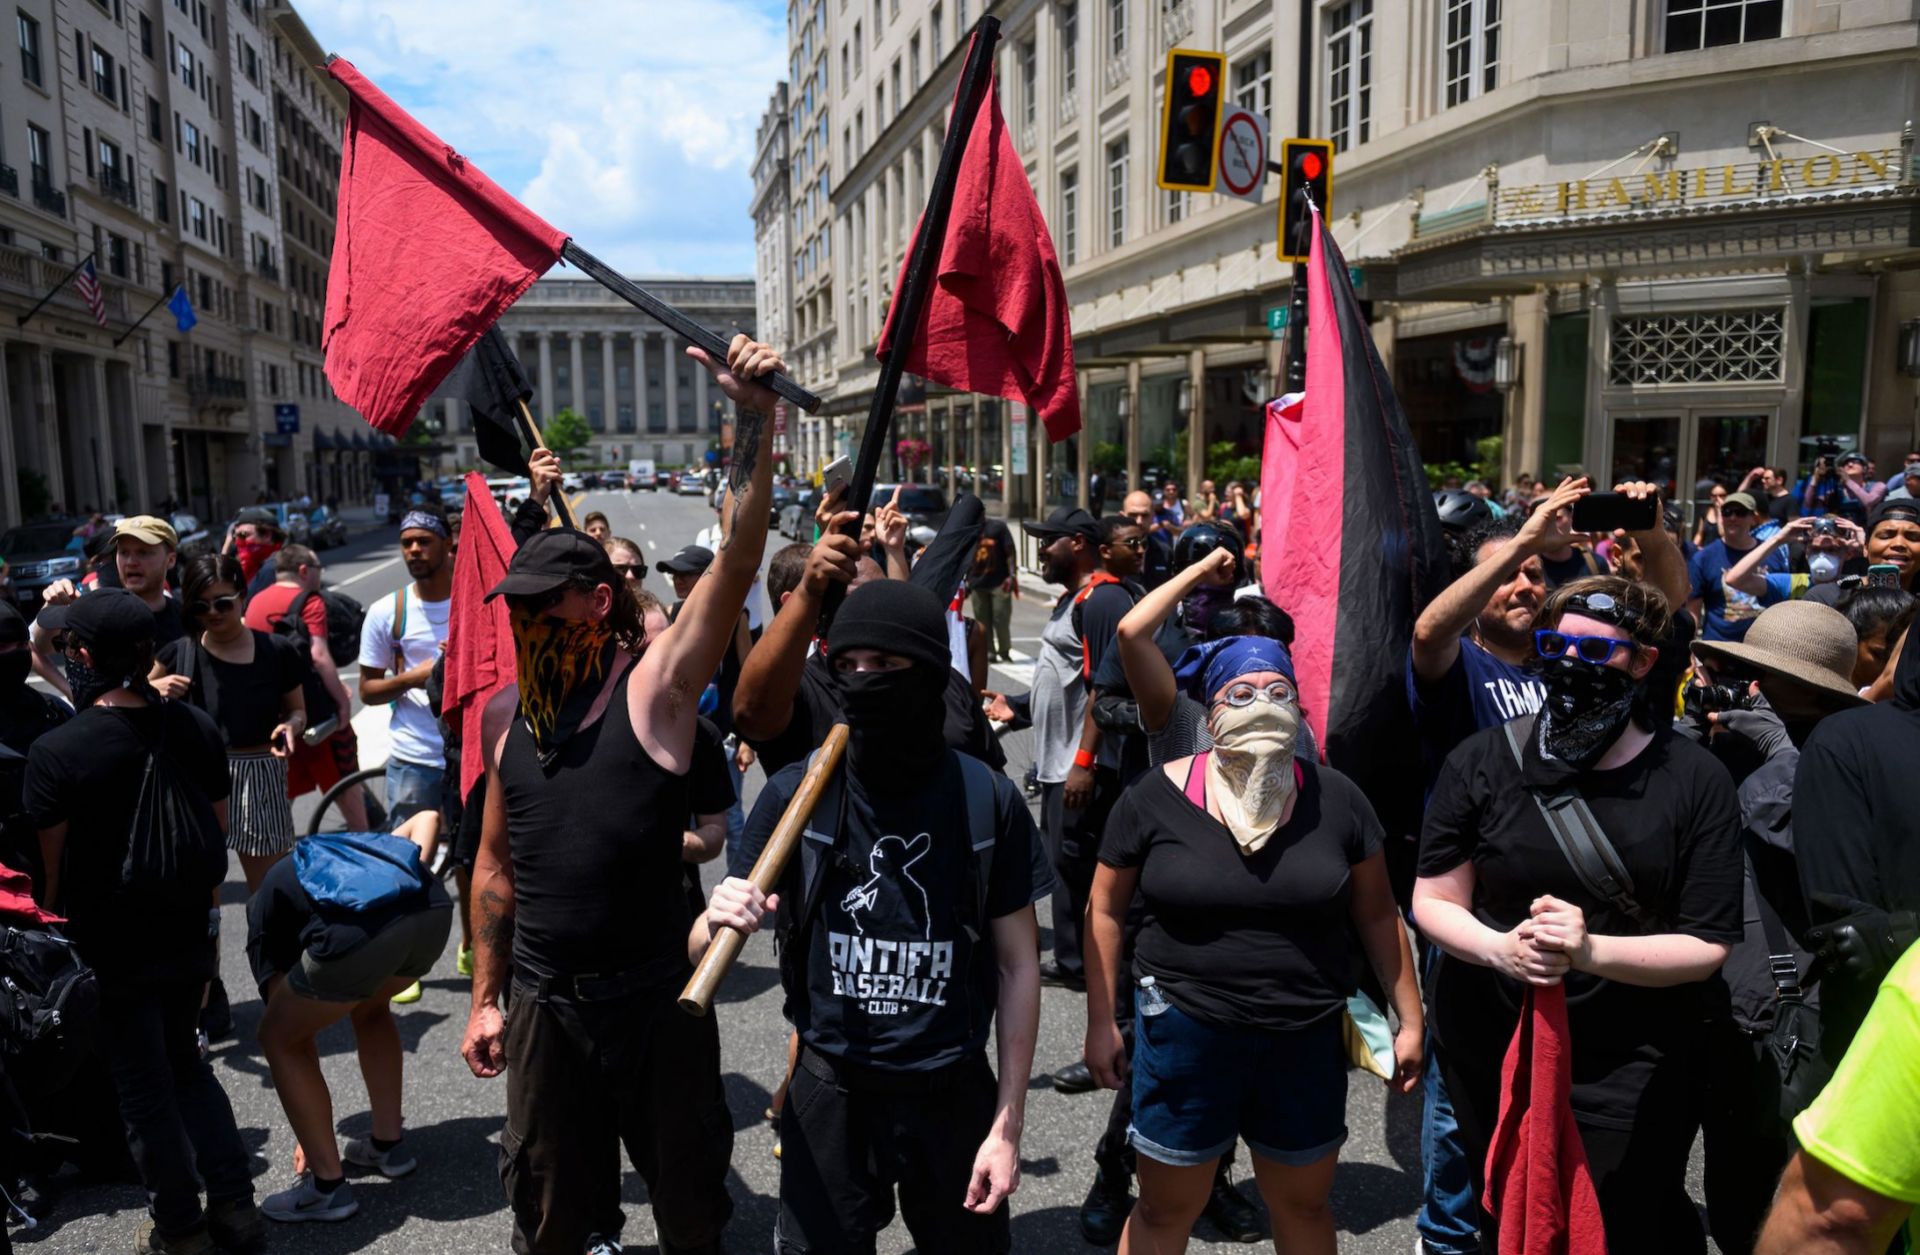 Members of an antifa group march as the Alt-Right movement gathers for a "Demand Free Speech" rally in July 6, 2019, Washington.